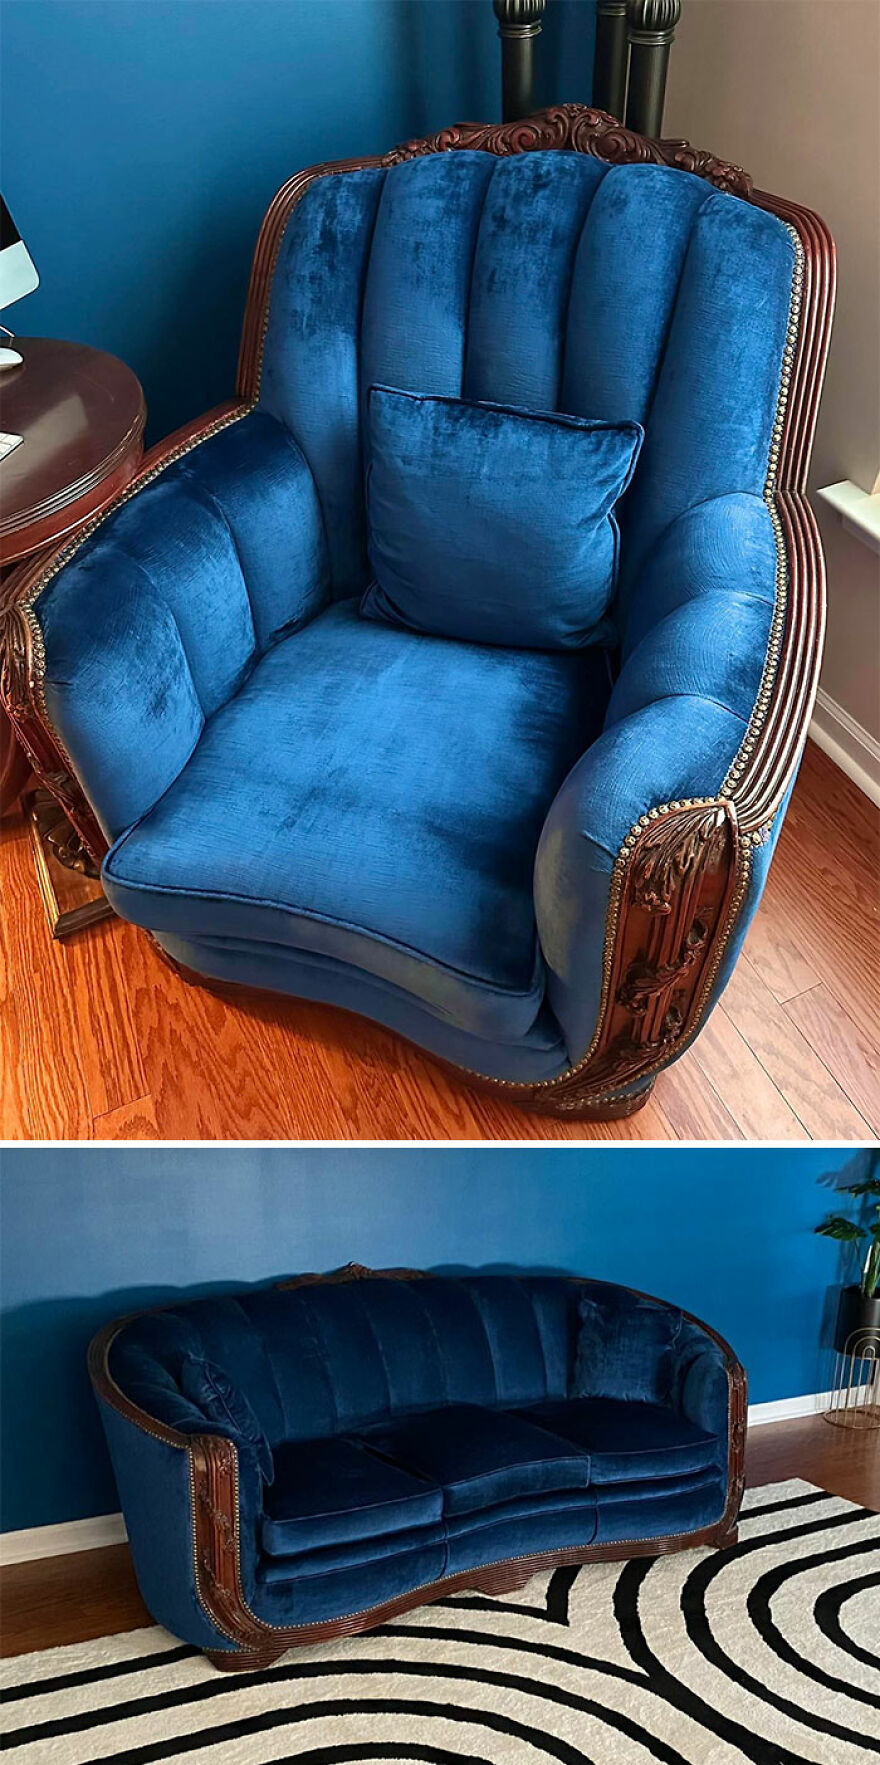 I Picked Up This 1930s Velvet, Curved Couch And Matching Club Chair From An Estate Sale In Virginia. It’s Almost Pristine Condition, I Can Tell It Was In Someone’s “Do Not Go In There” Living Room. The Mirror Was The Top Part Of A Giant, Vintage Buffet That Was Destijed For The Dump So I Took It. Cut The Bottom Wood Support Rods Off, Cleaned And Stained It, And Even Hung It Myself ( It Is Huge) Cats Were Secondhand From Spca And From A Guy At A Waterpark. Still Piecing This Room Together With Second Hand Finds